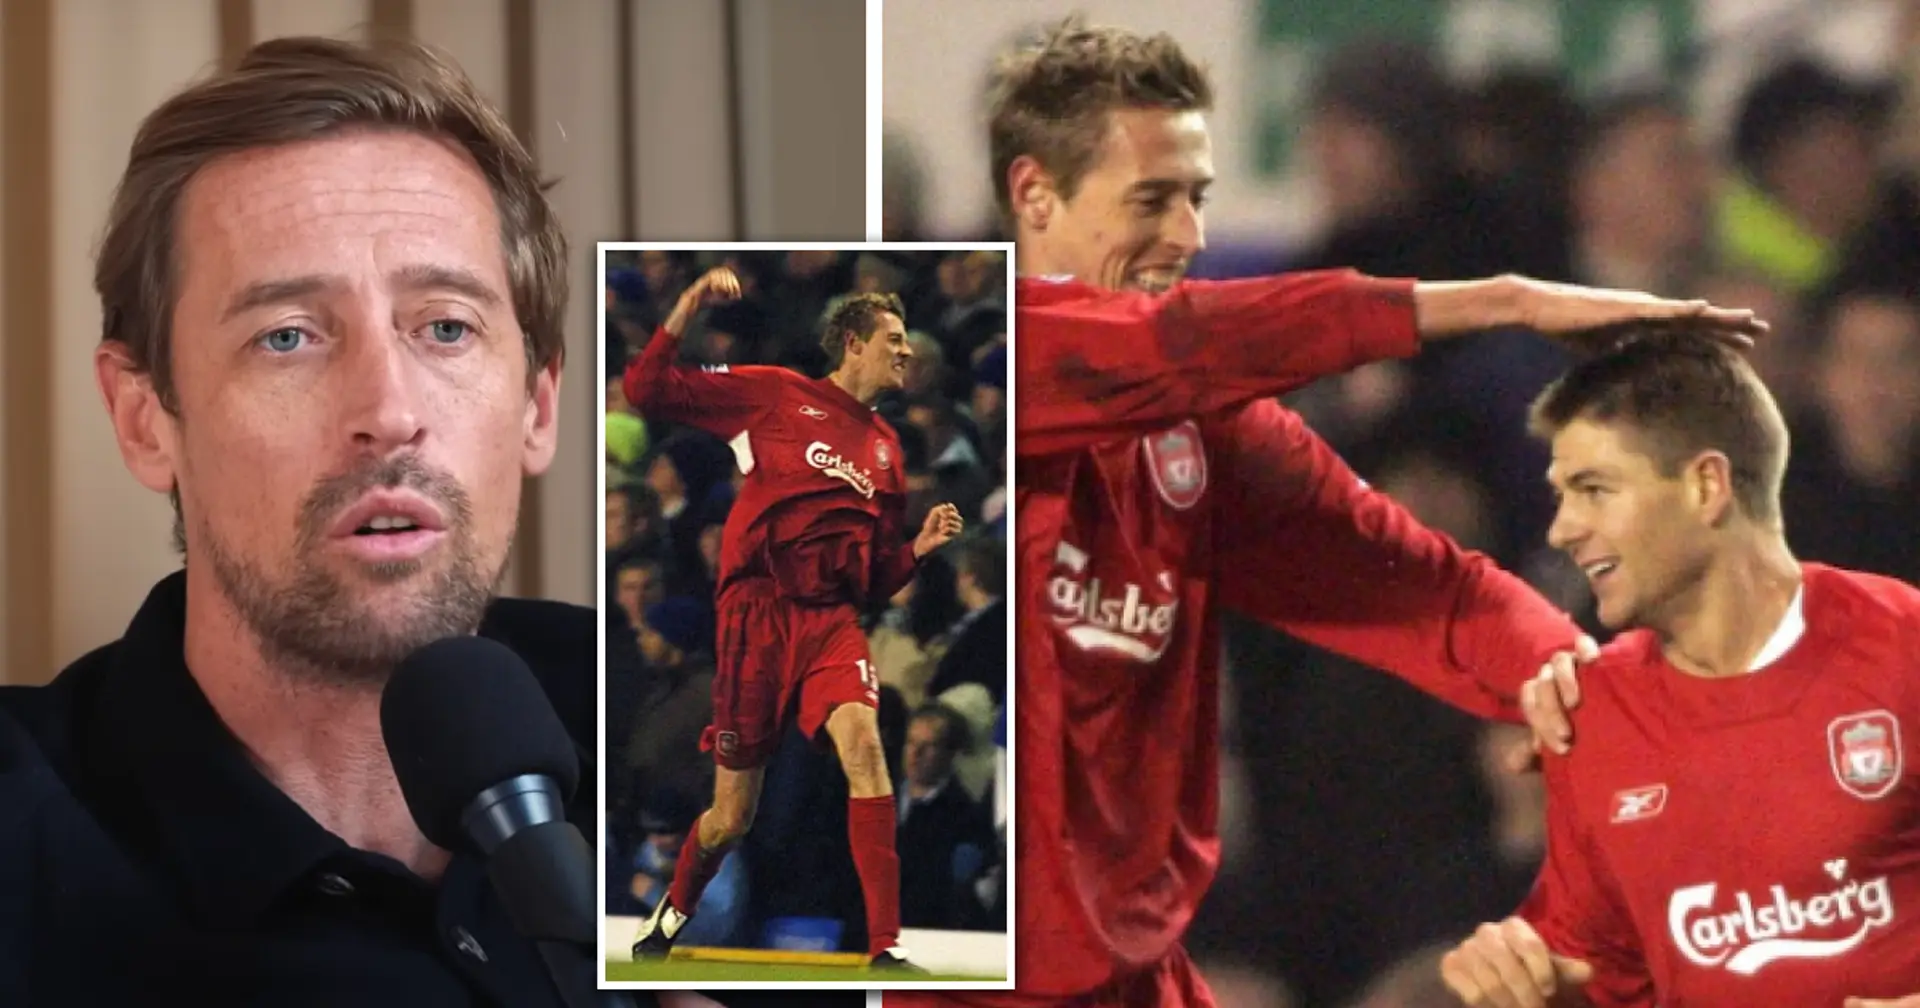 'The fans will always remember it': Steven Gerrard made Liverpool prediction for Peter Crouch on team bus